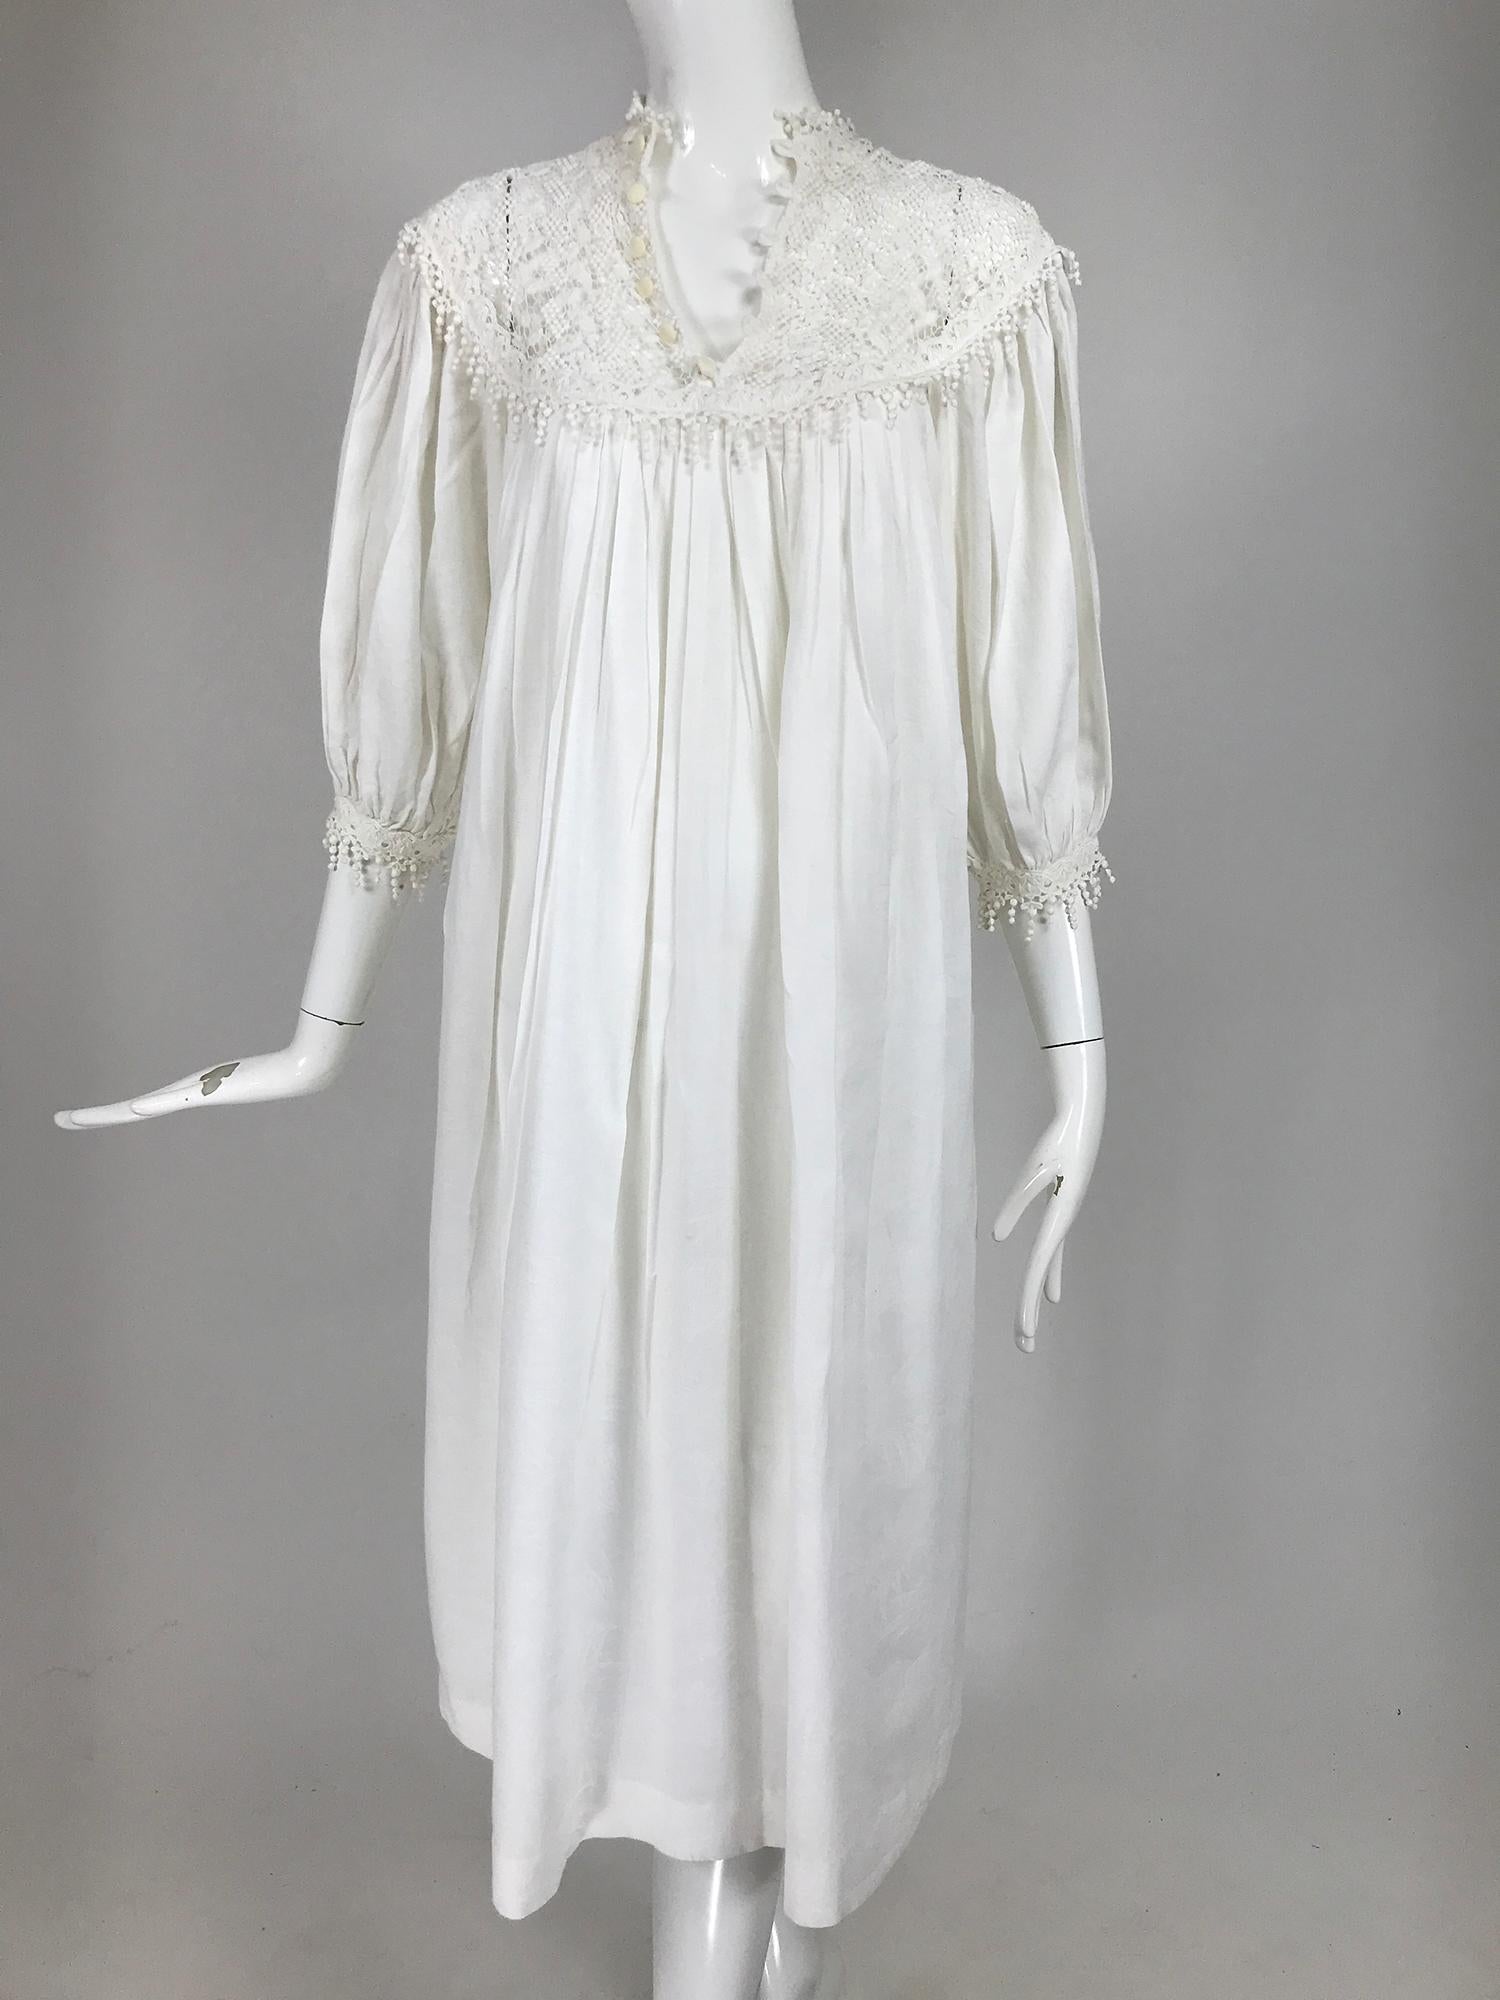 Vintage Chantal Thomass ivory crochet yoke cotton damask peasant dress from the 1970s. Pull on dress with a deep round yoke and narrow band collar of crochet lace, it closes at the front with buttons and loops. The dress has raglan sleeves the cuffs